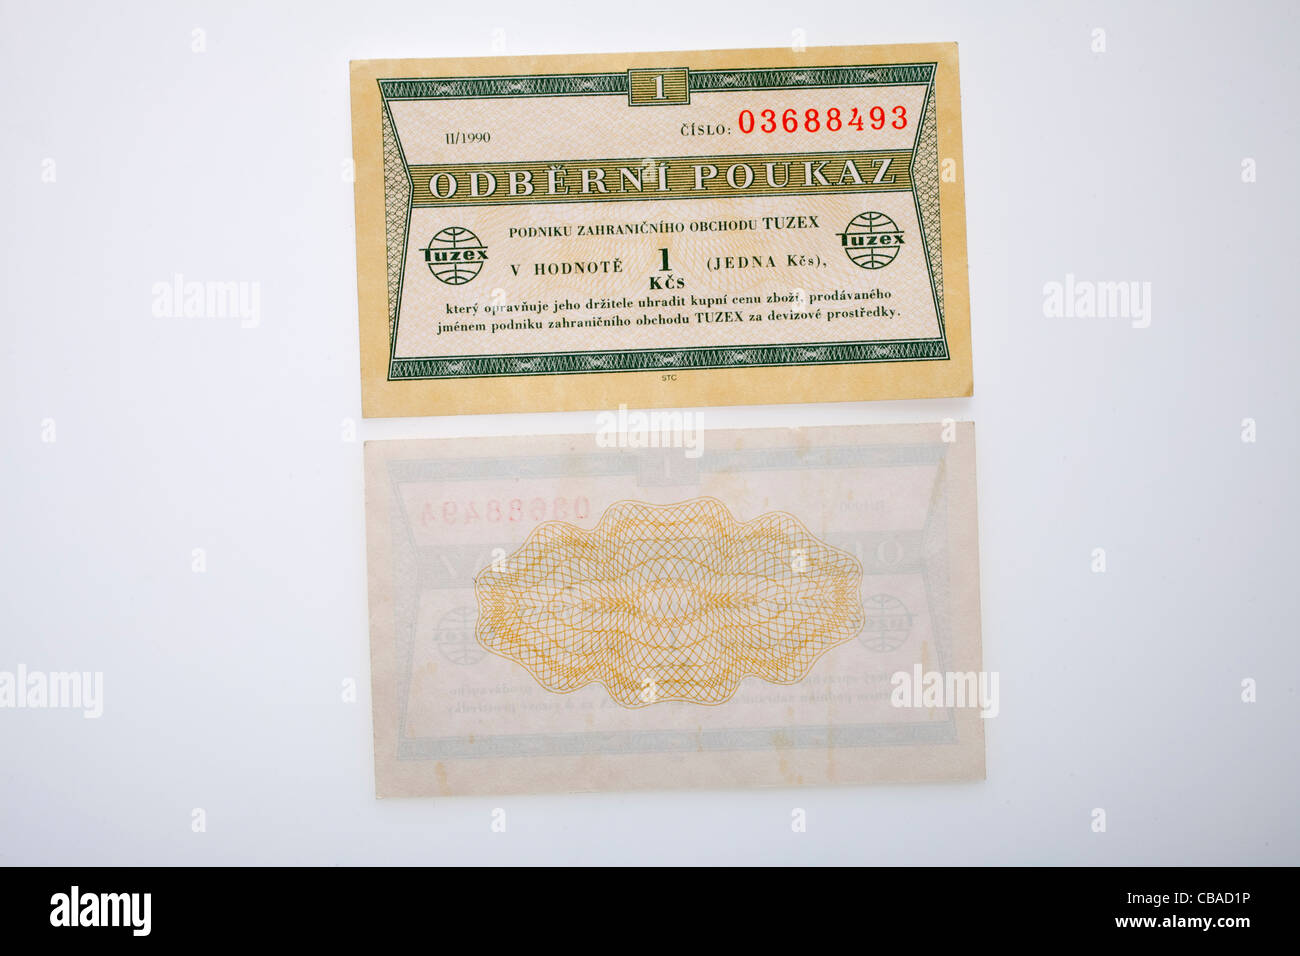 A Tuzex voucher in 1 crown denomination. Tuzex vouchers called 'bony' were valid for shoping in Tuzex store which were the only Stock Photo